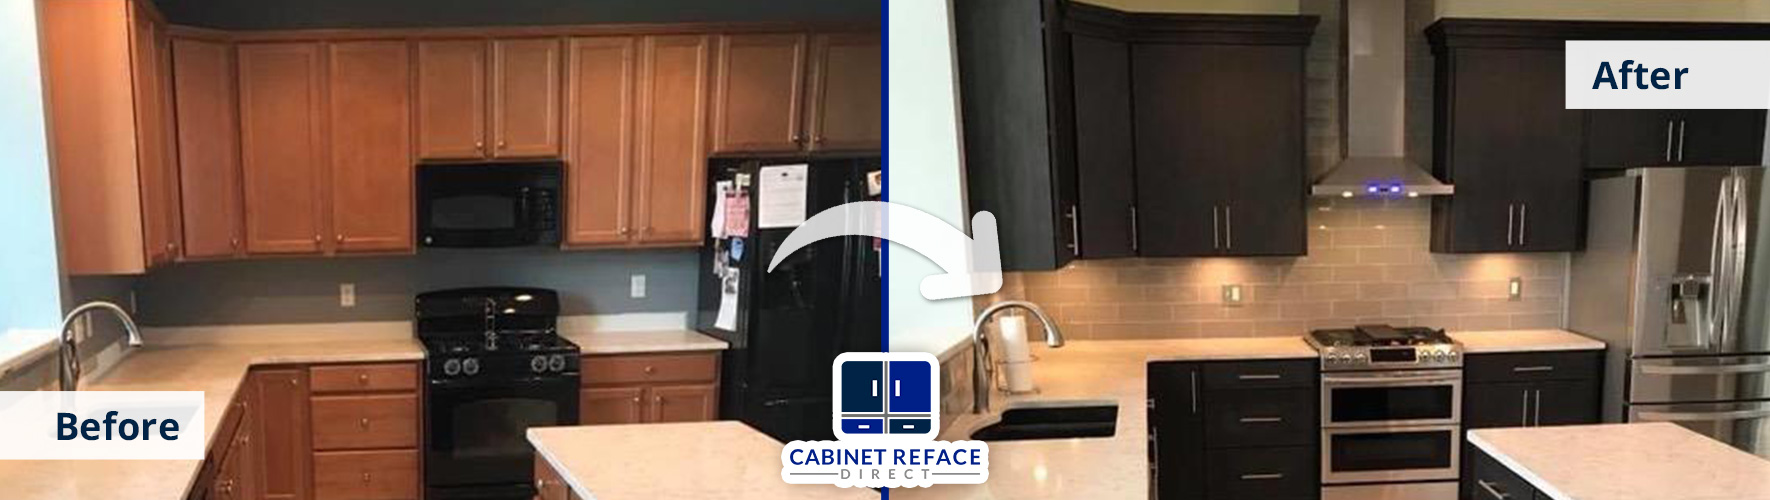 Image Showing How To Reface Cabinets Turning a Simple Kitchen Turned Into Its Modern, Sleek Version